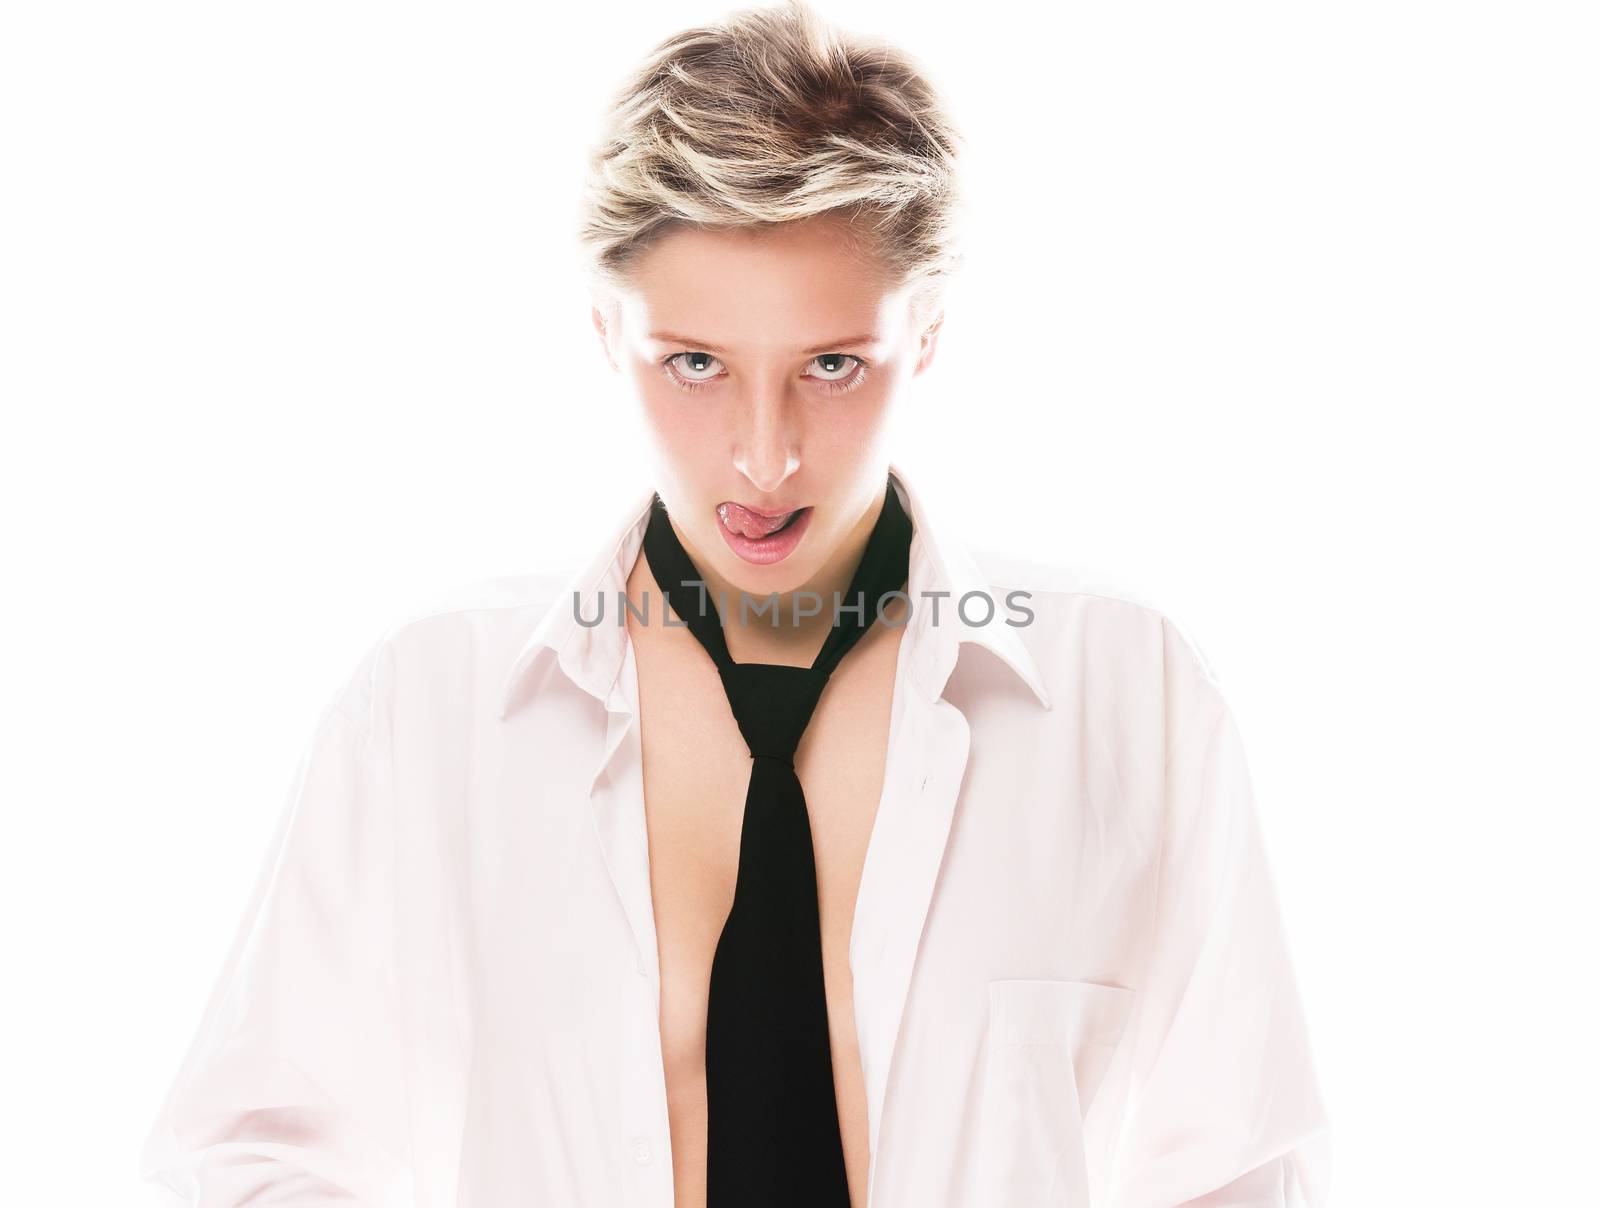 young blonde woman wearing a tie licking her lips on white background